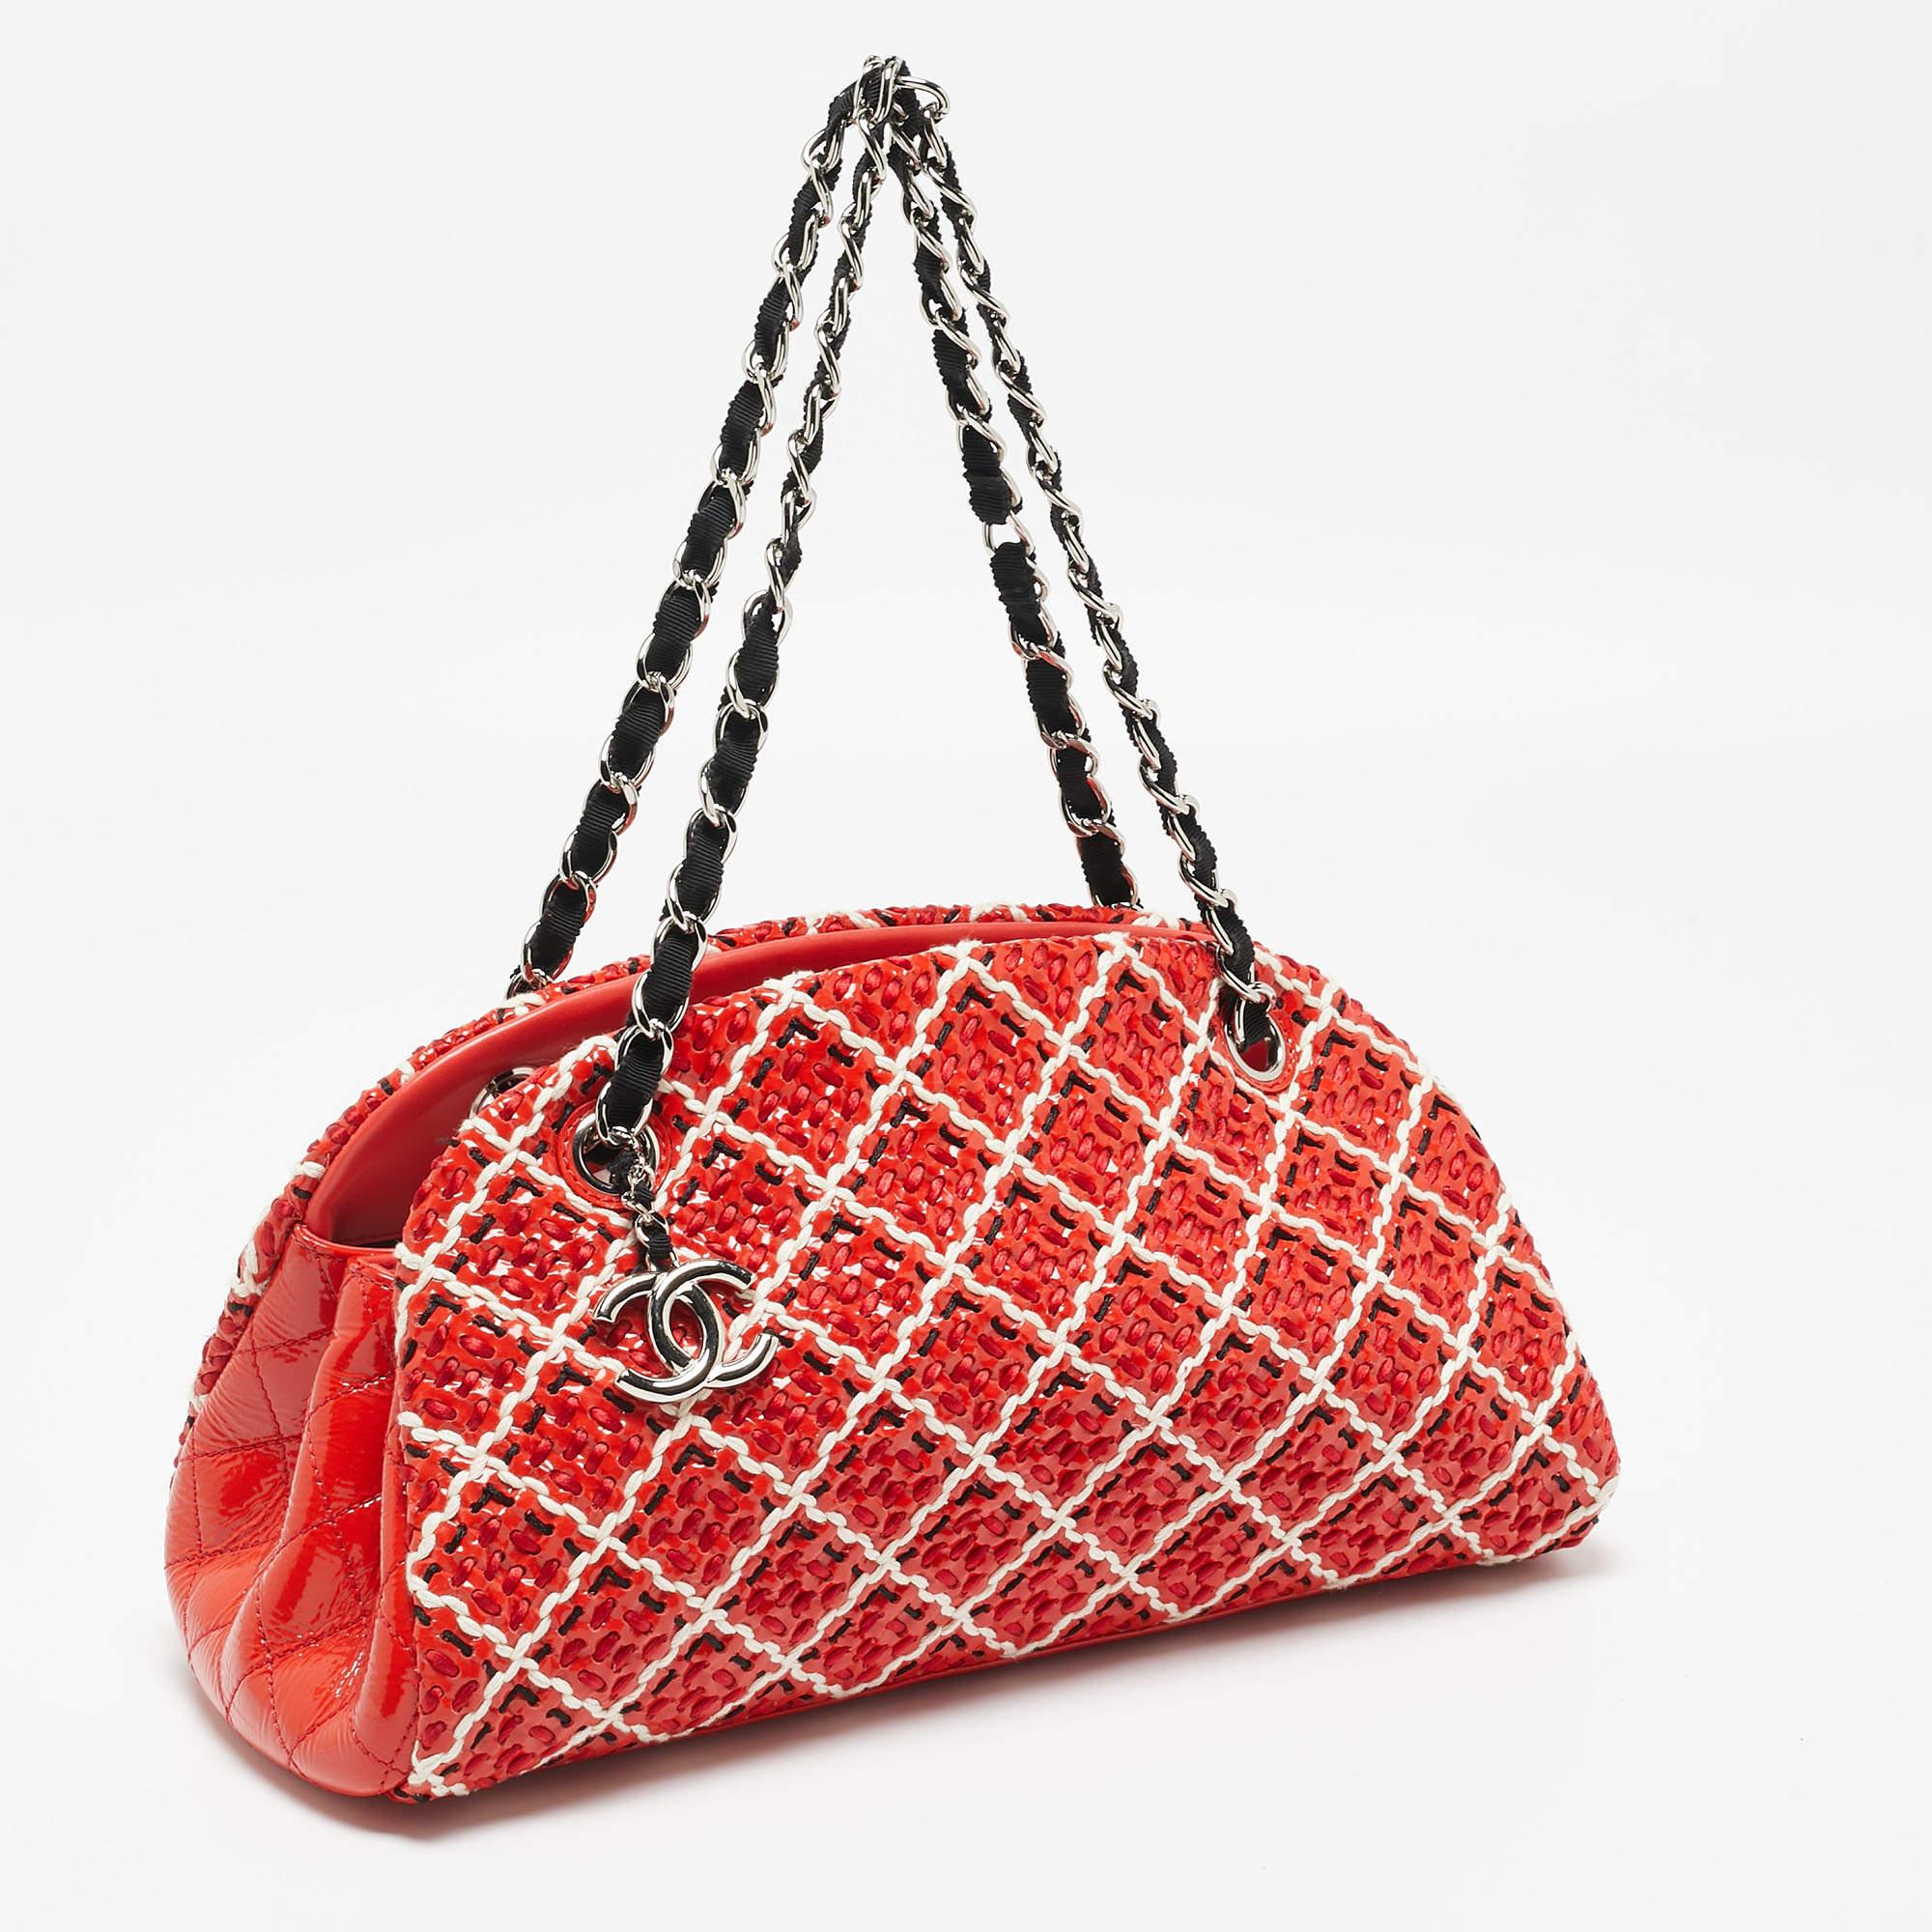 The Chanel Just Mademoiselle Bag is a sophisticated accessory featuring an iconic quilted pattern, vibrant red and multicolor hues, and exquisite patent leather. With meticulous stitching and a medium size, it epitomizes timeless elegance and modern